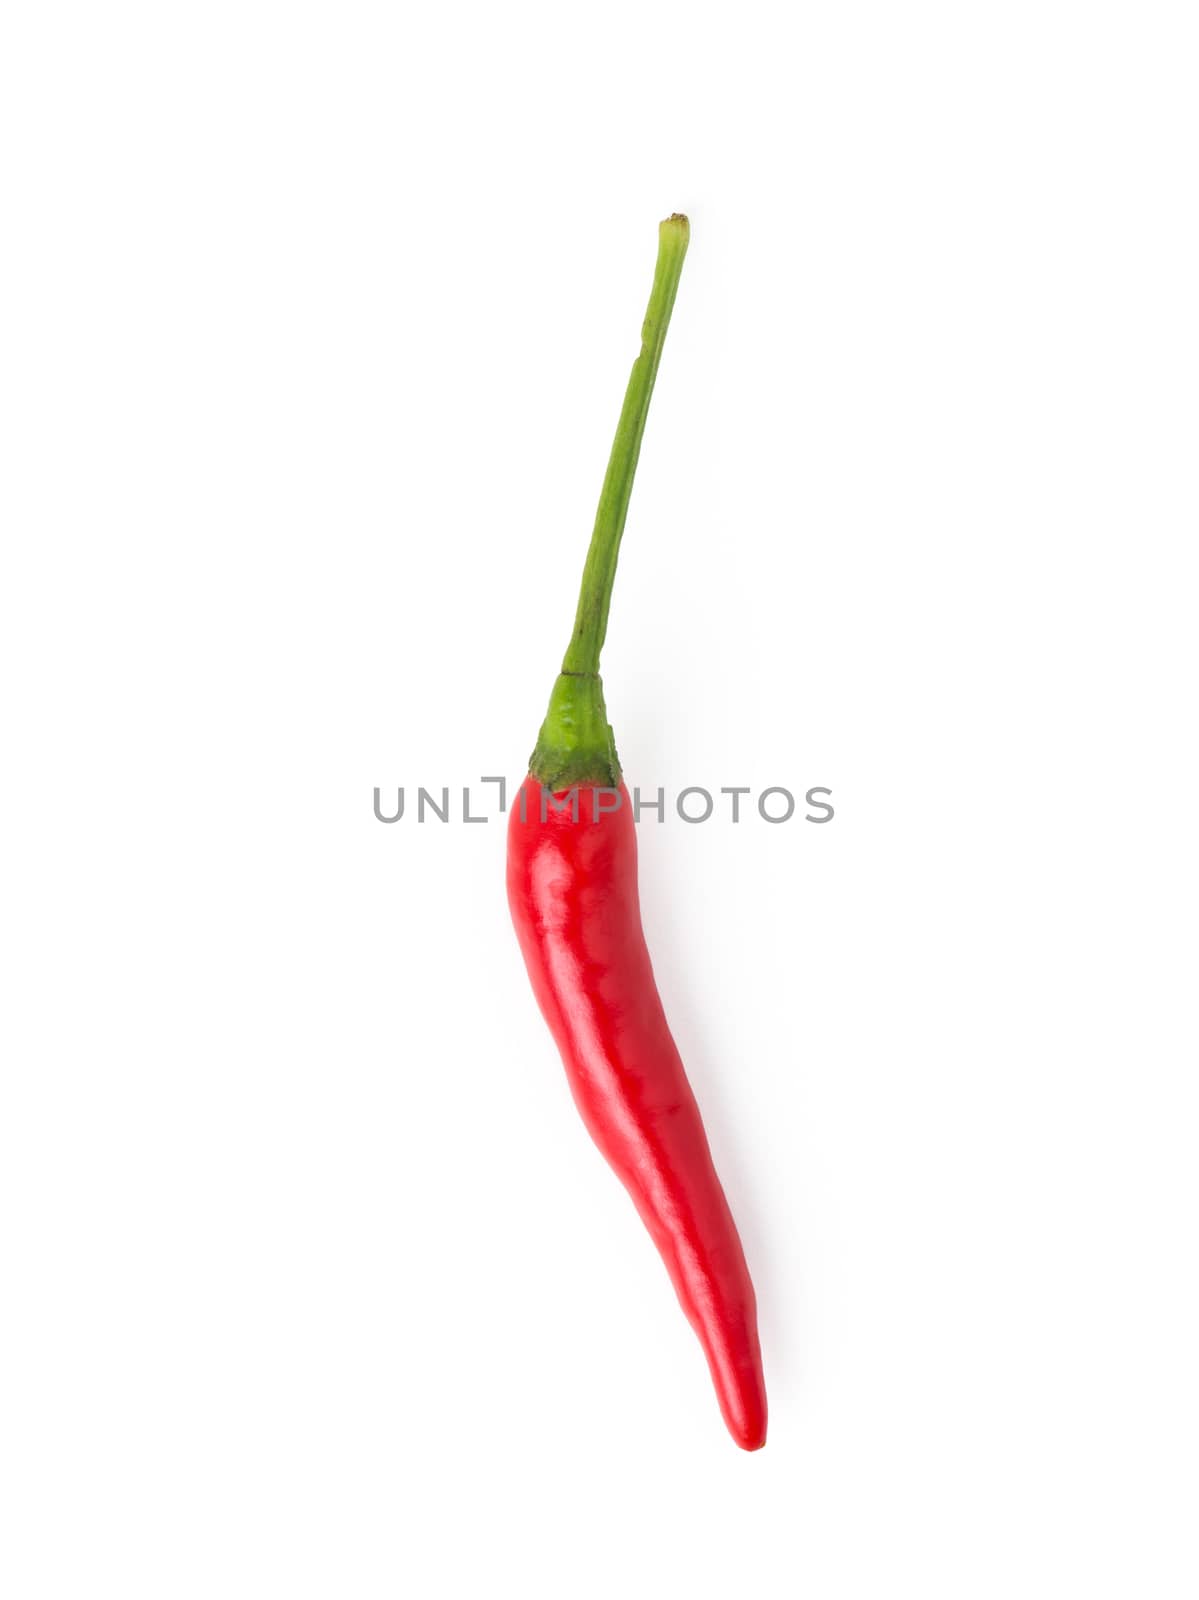 chili pepper by antpkr